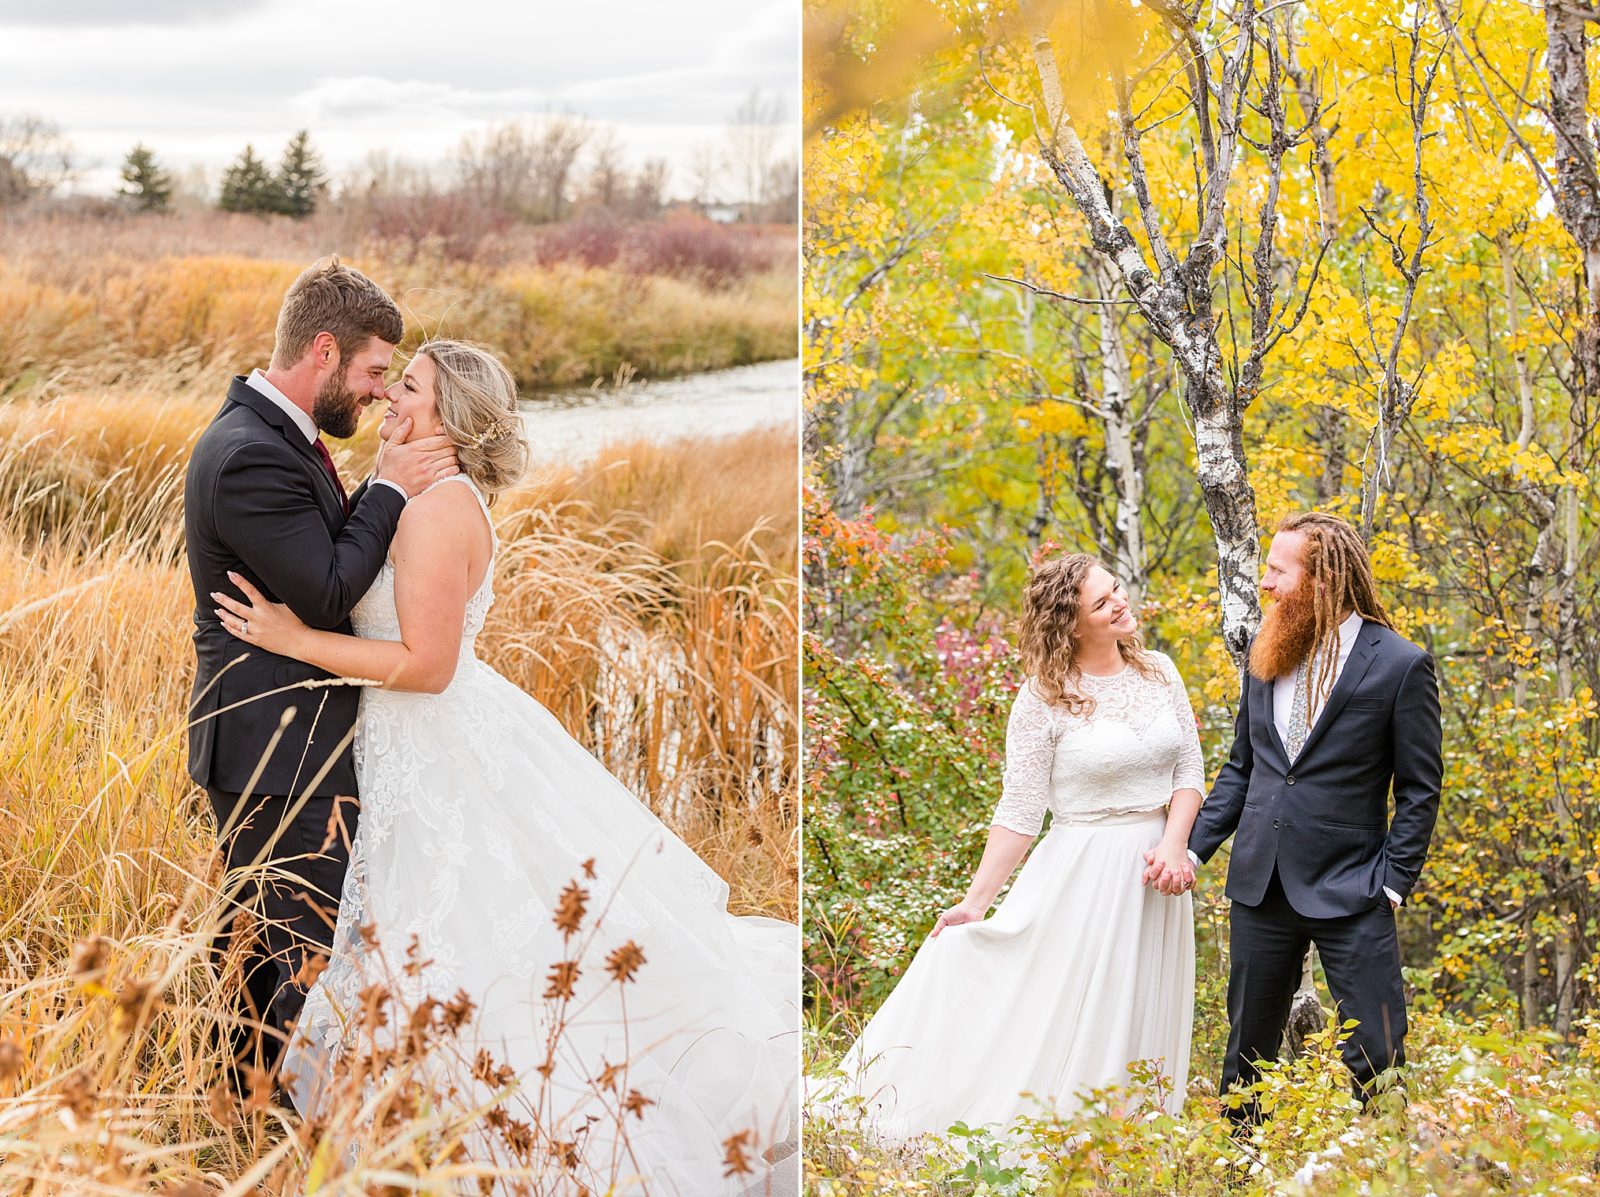 Bride and groom eloping in Saskatchewan by a river and by birch trees in the fall